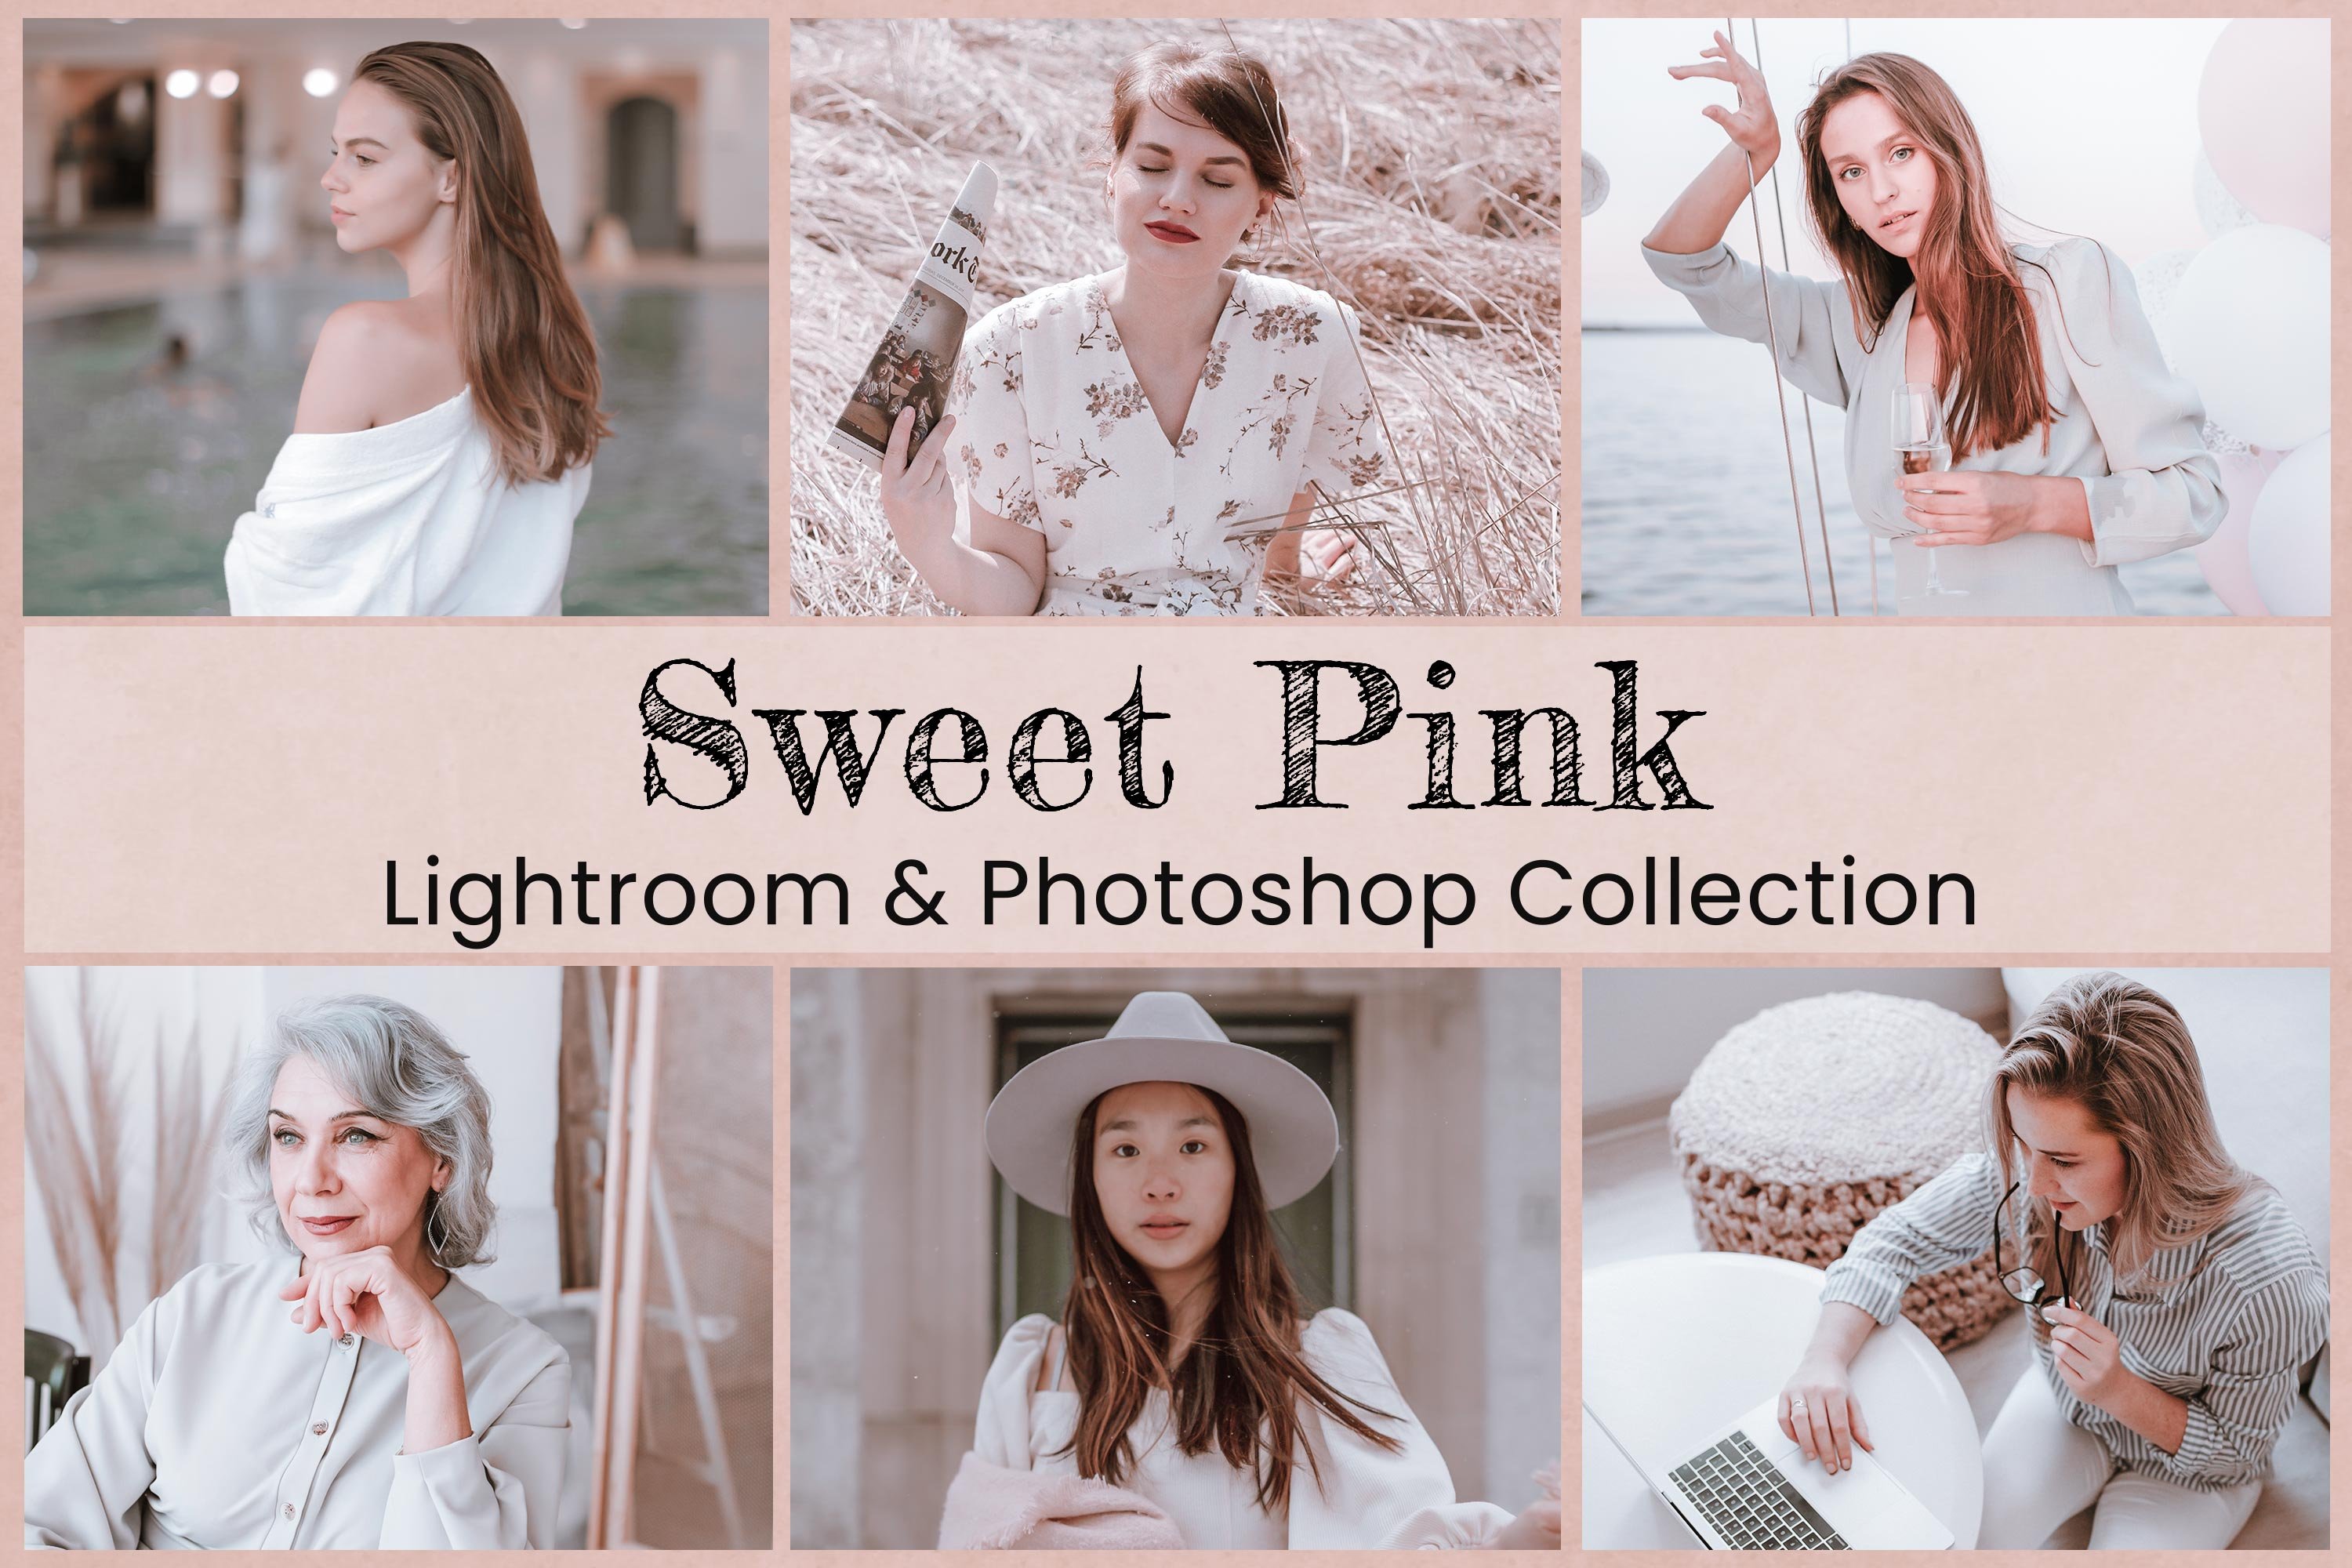 10 Sweet Pink Photo Edit Collection 6251612